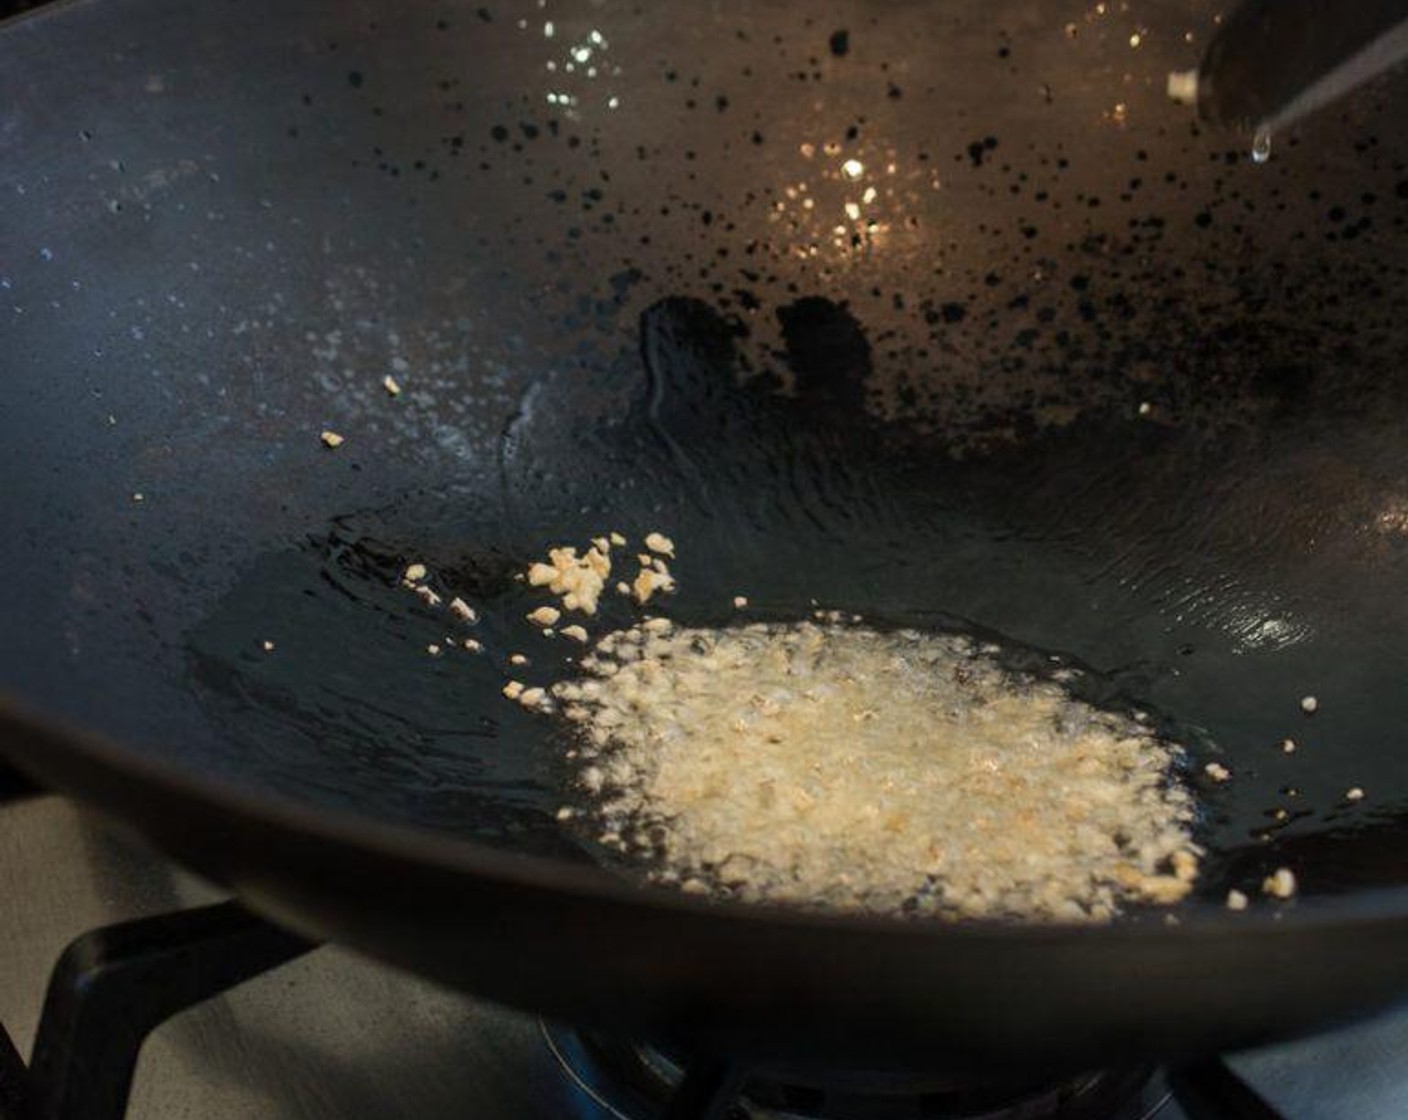 step 2 Heat up your wok over maximum heat. As soon as it starts to smoke a little, pour the Cooking Oil (3 Tbsp) into the wok, immediately followed by the Garlic (3 cloves). Give it a quick stir.